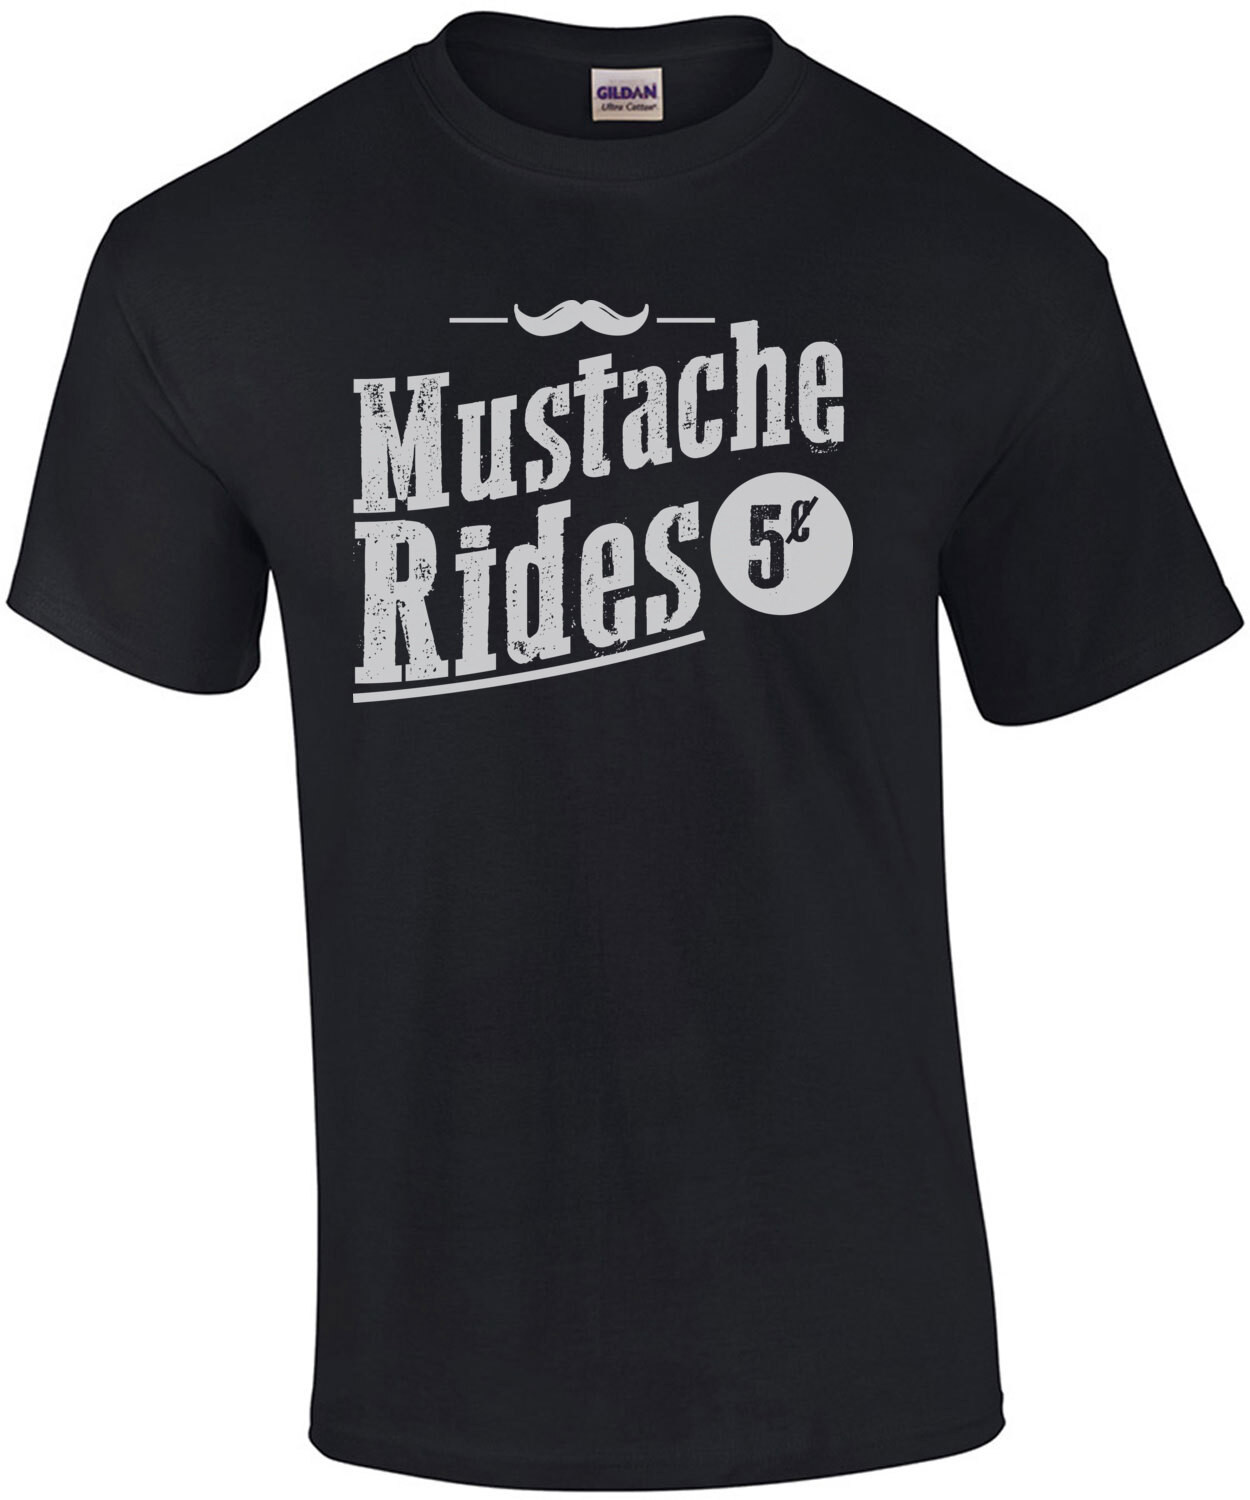 Mustache Rides 5 cents - funny offensive sexual t-shirt